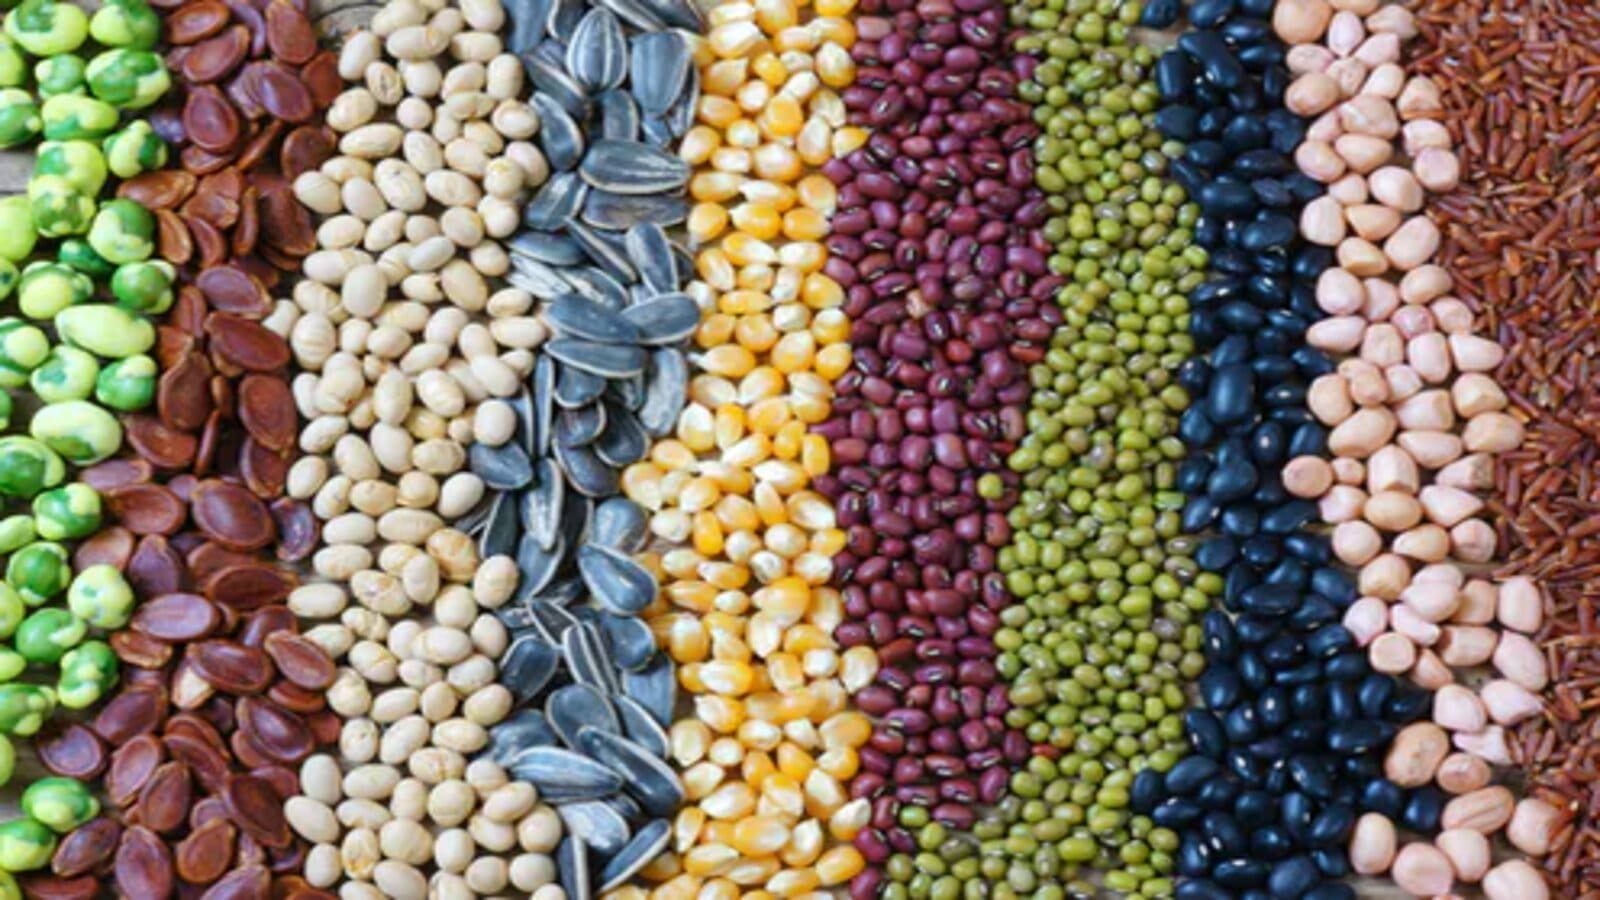 Quality seed shortage threatening food security in Nigeria: Experts